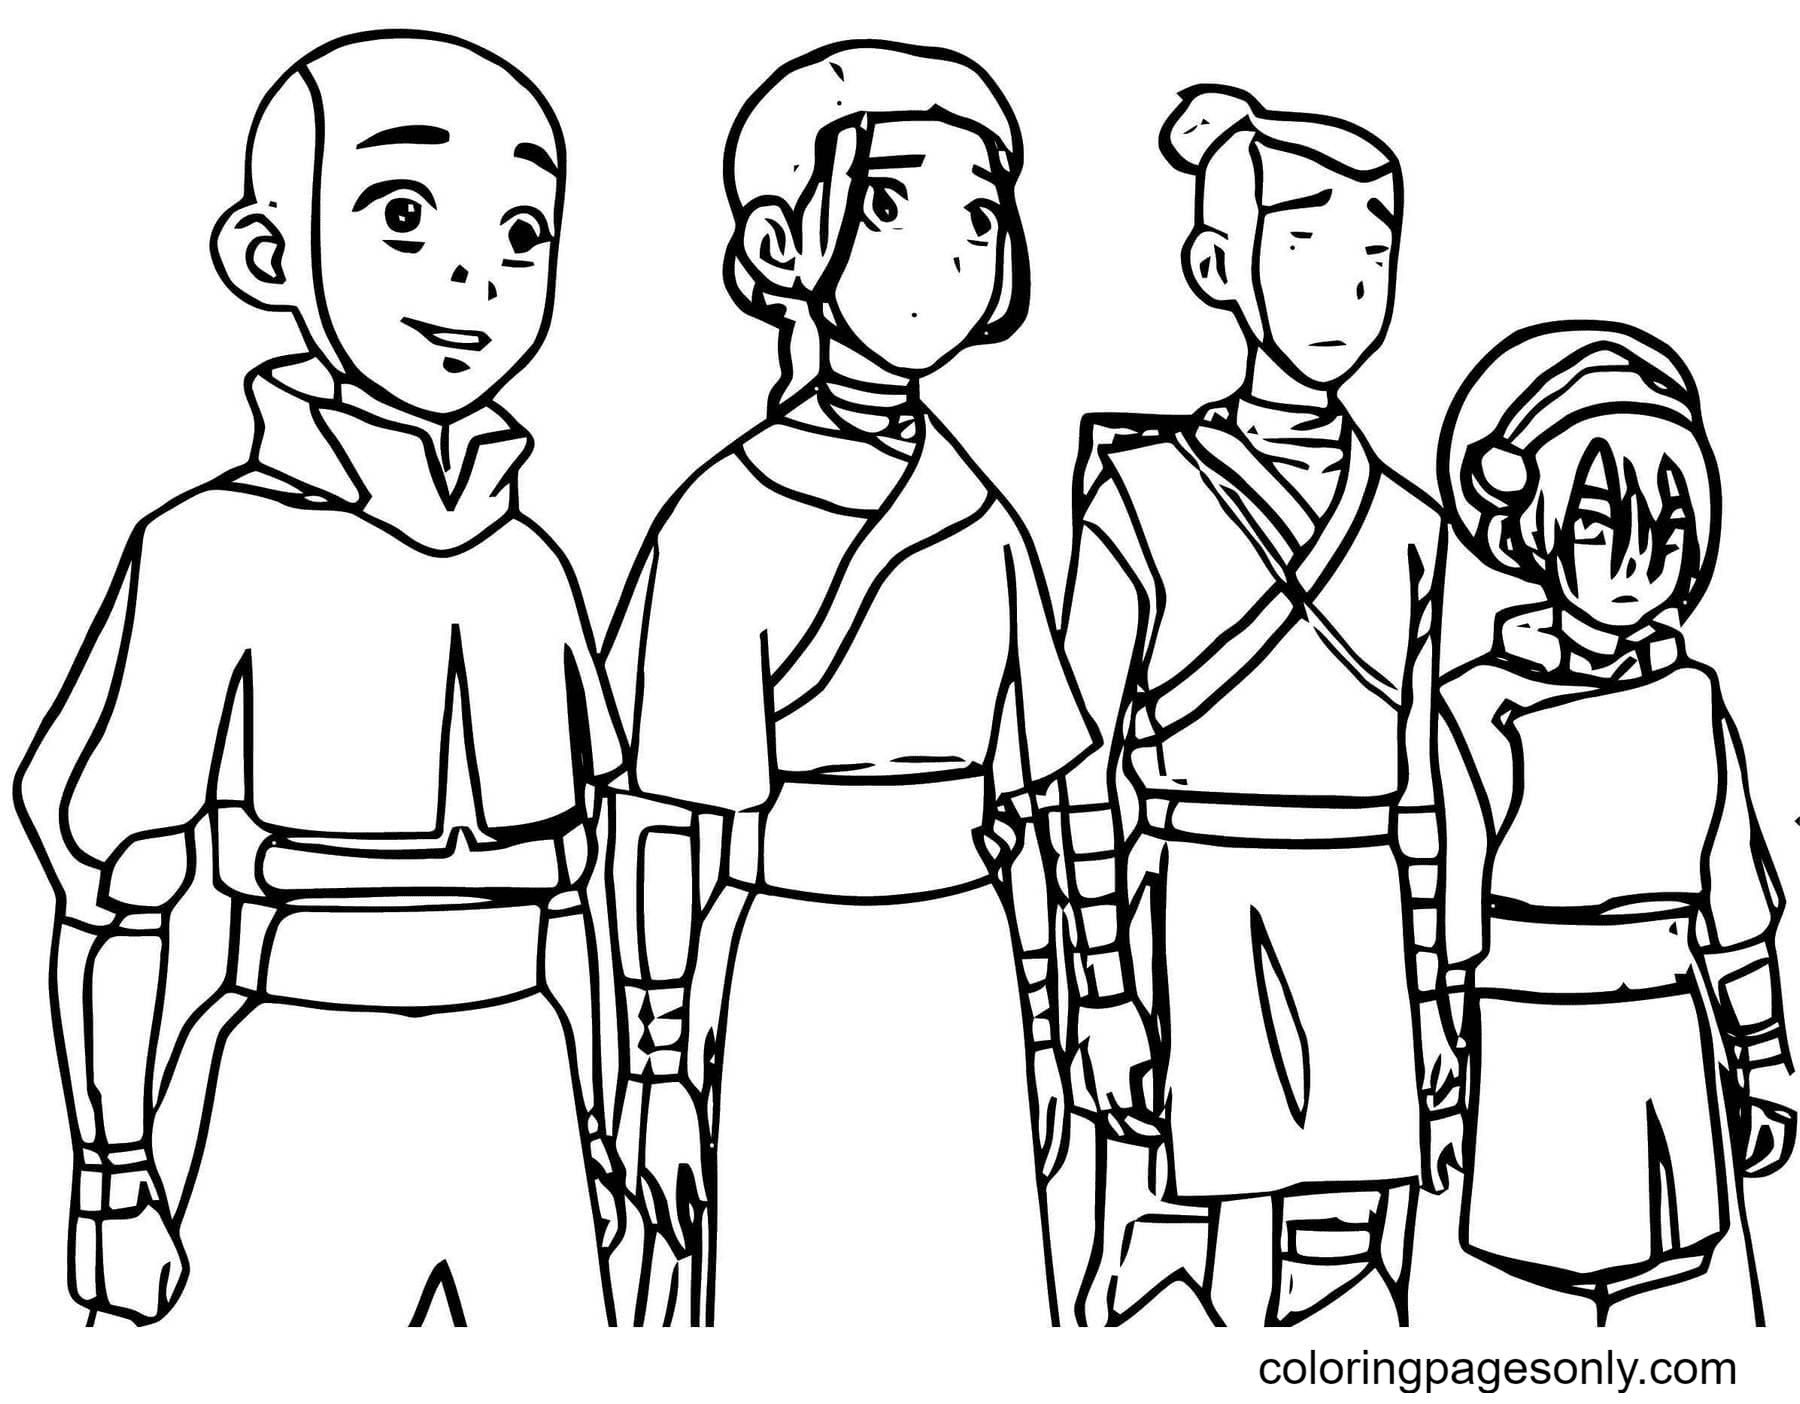 Characters from the anime Avatar Coloring Page